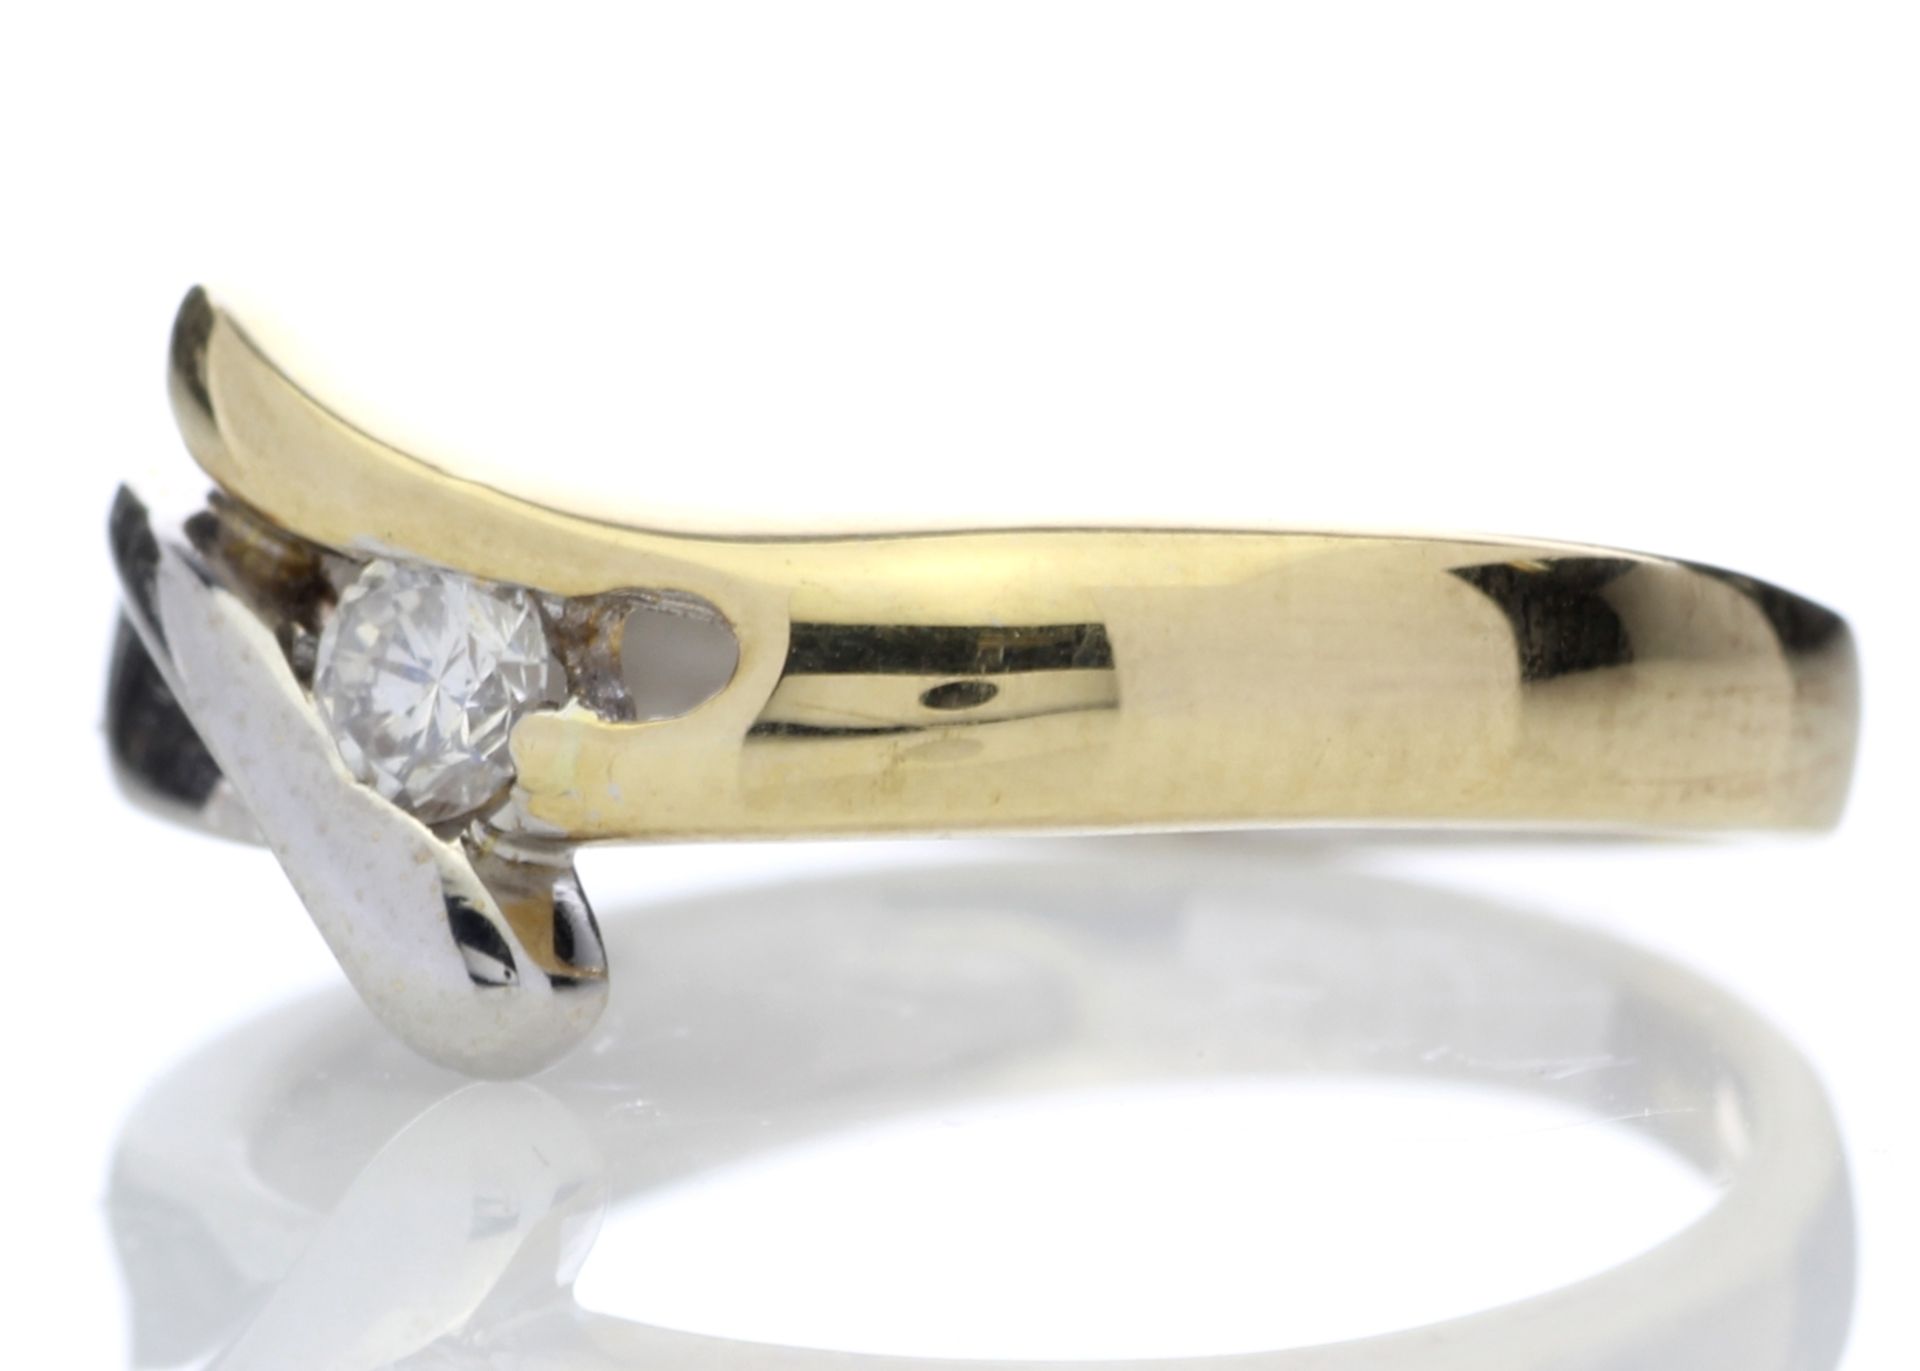 Valued by GIE £6,795.00 - 18ct Single Stone Illusion Set Diamond Ring 0.15 Carats - 1110001, - Image 2 of 5